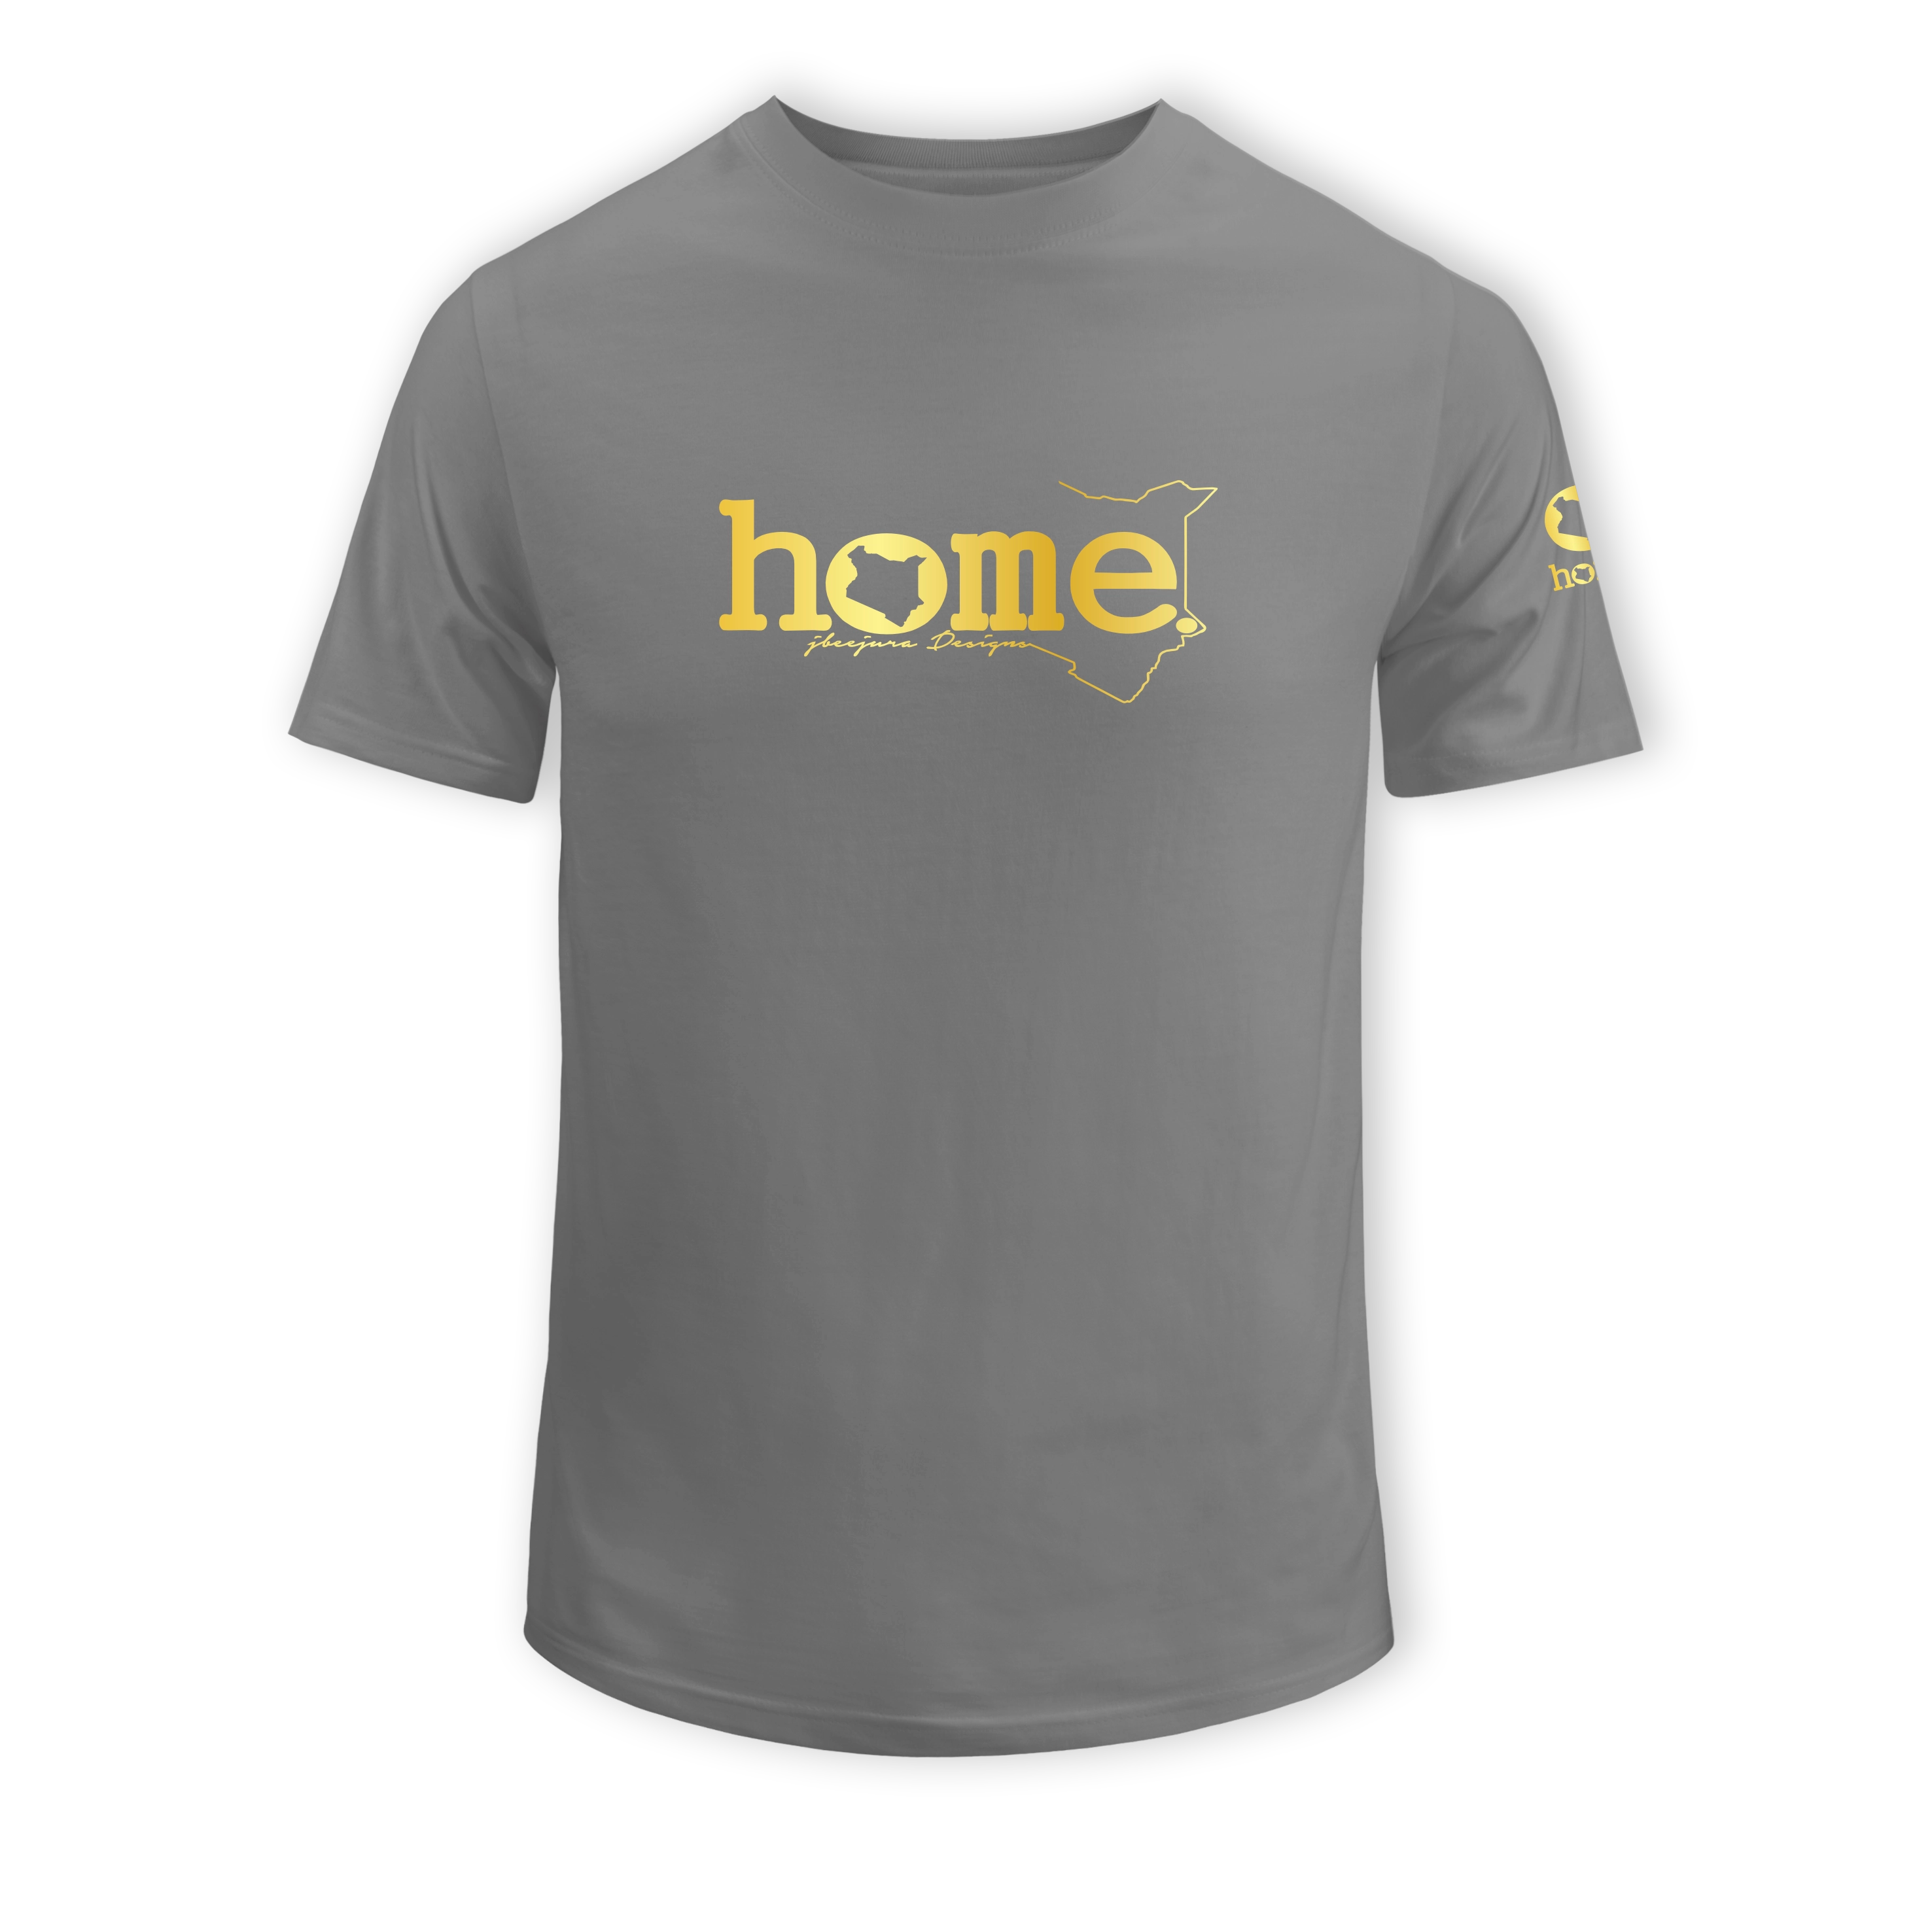 home_254 SHORT-SLEEVED SAGE T-SHIRT WITH A GOLD CLASSIC WORDS PRINT – COTTON PLUS FABRIC